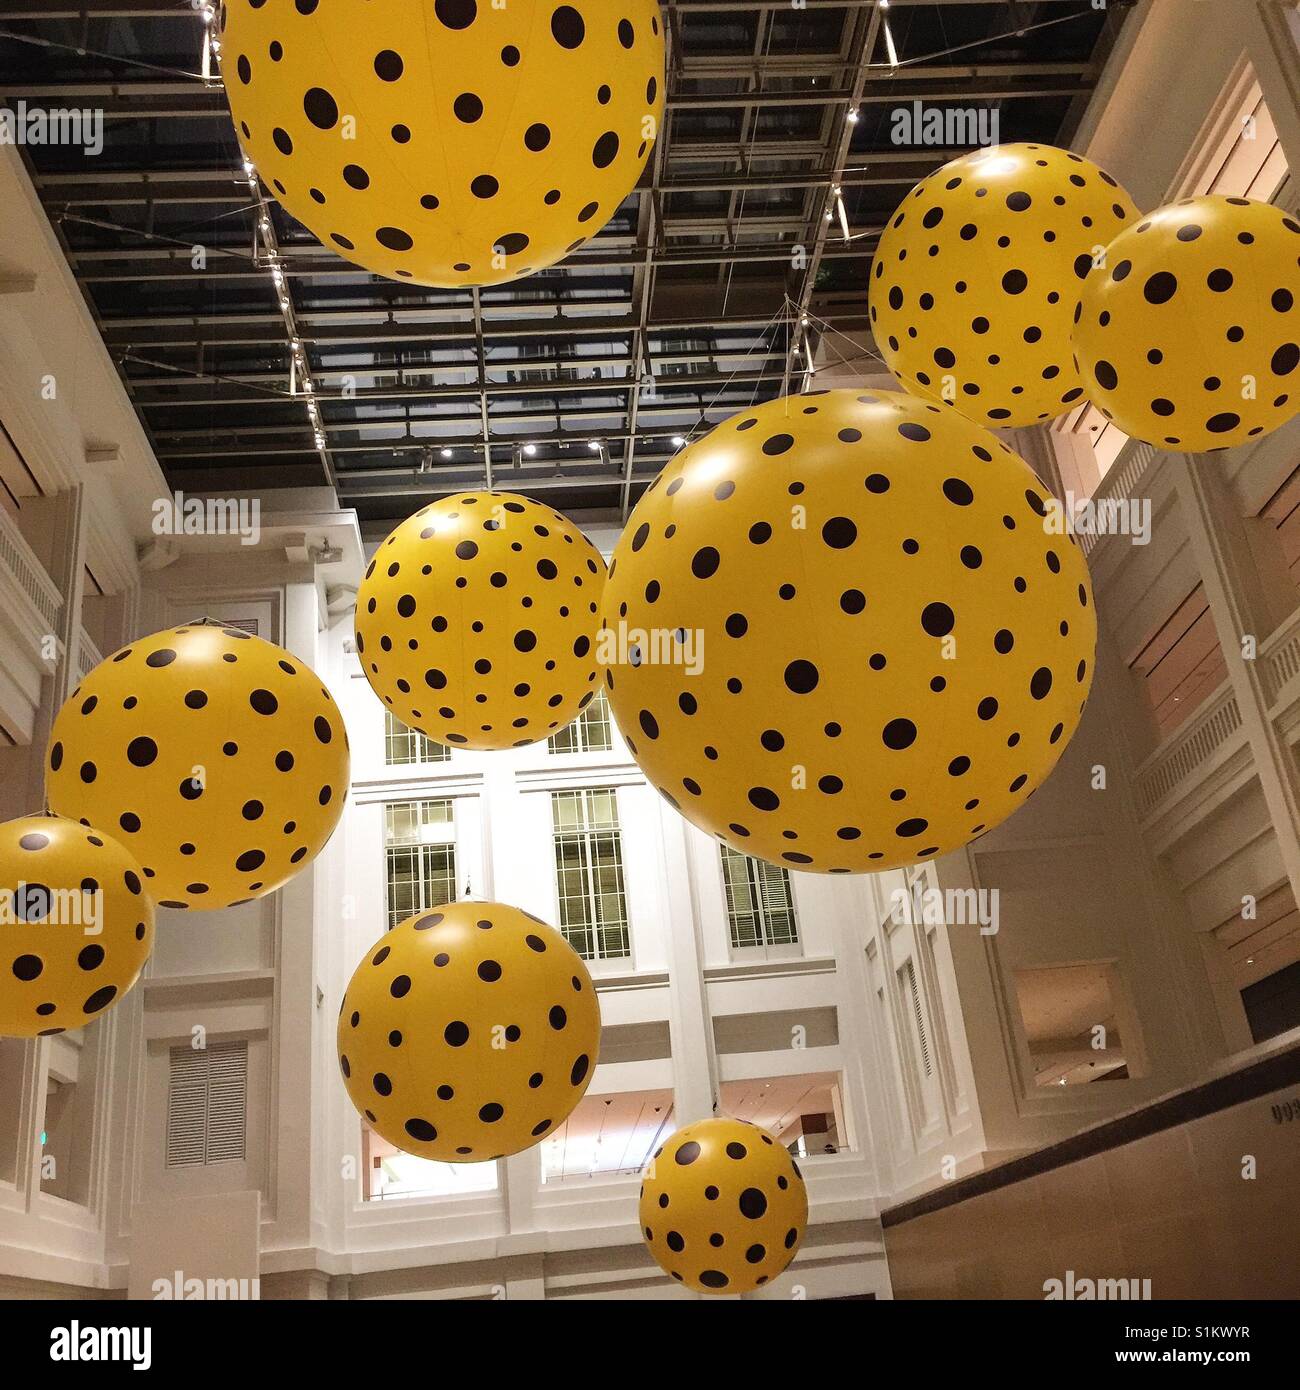 Visual Art Display- Dots Obsession by Japanese Artist, Yayoi Kusama at the National Gallery Singapore Stock Photo